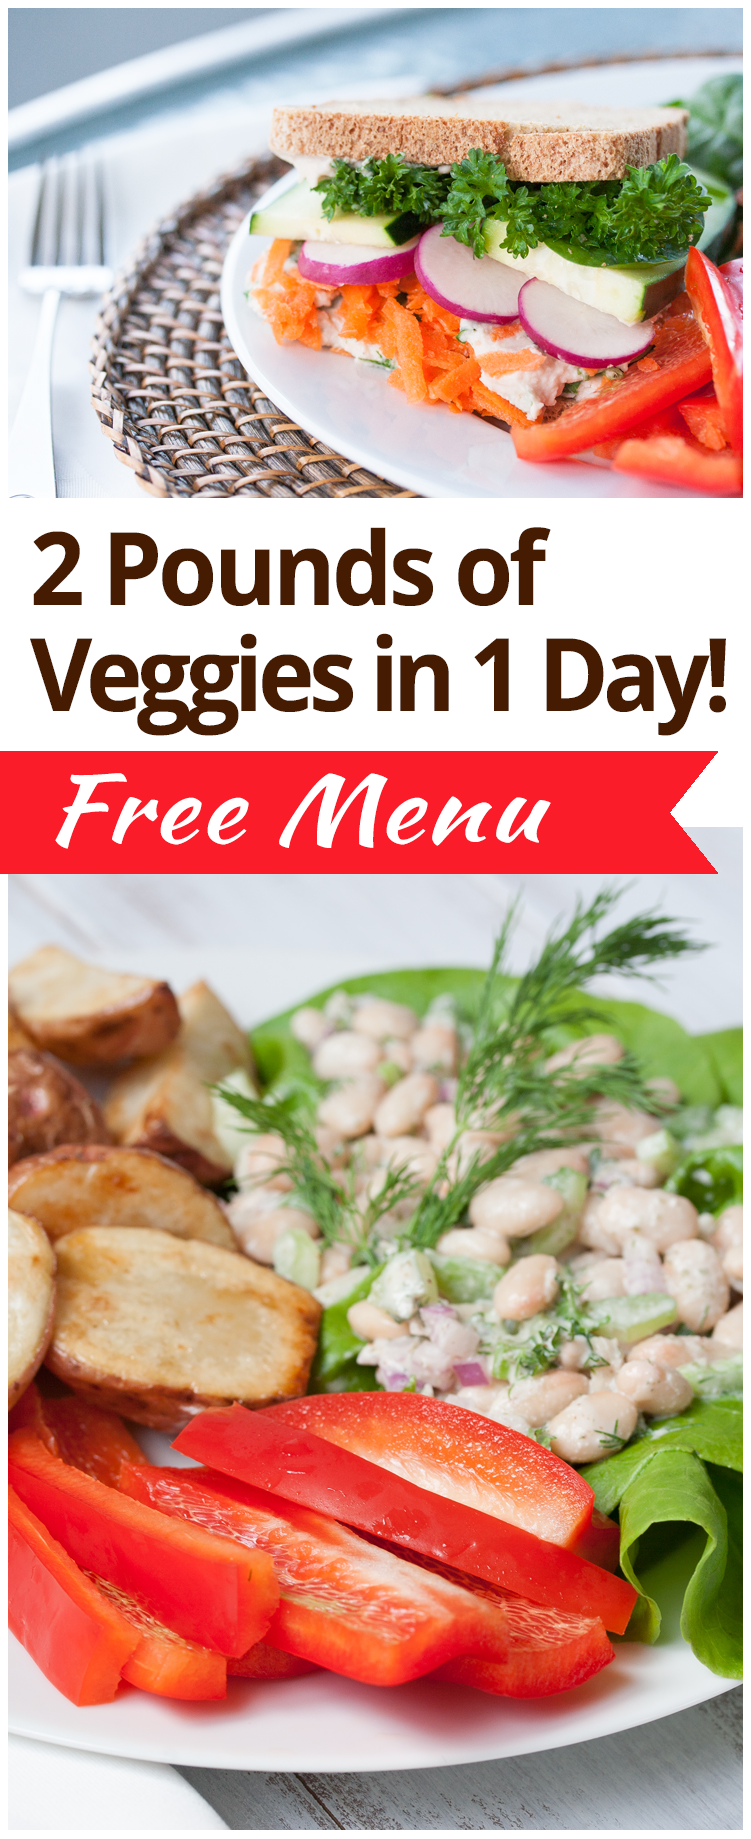 2 Pounds of Veggies in 1 Day + 3 Easy Plant-Based Recipes for Spring